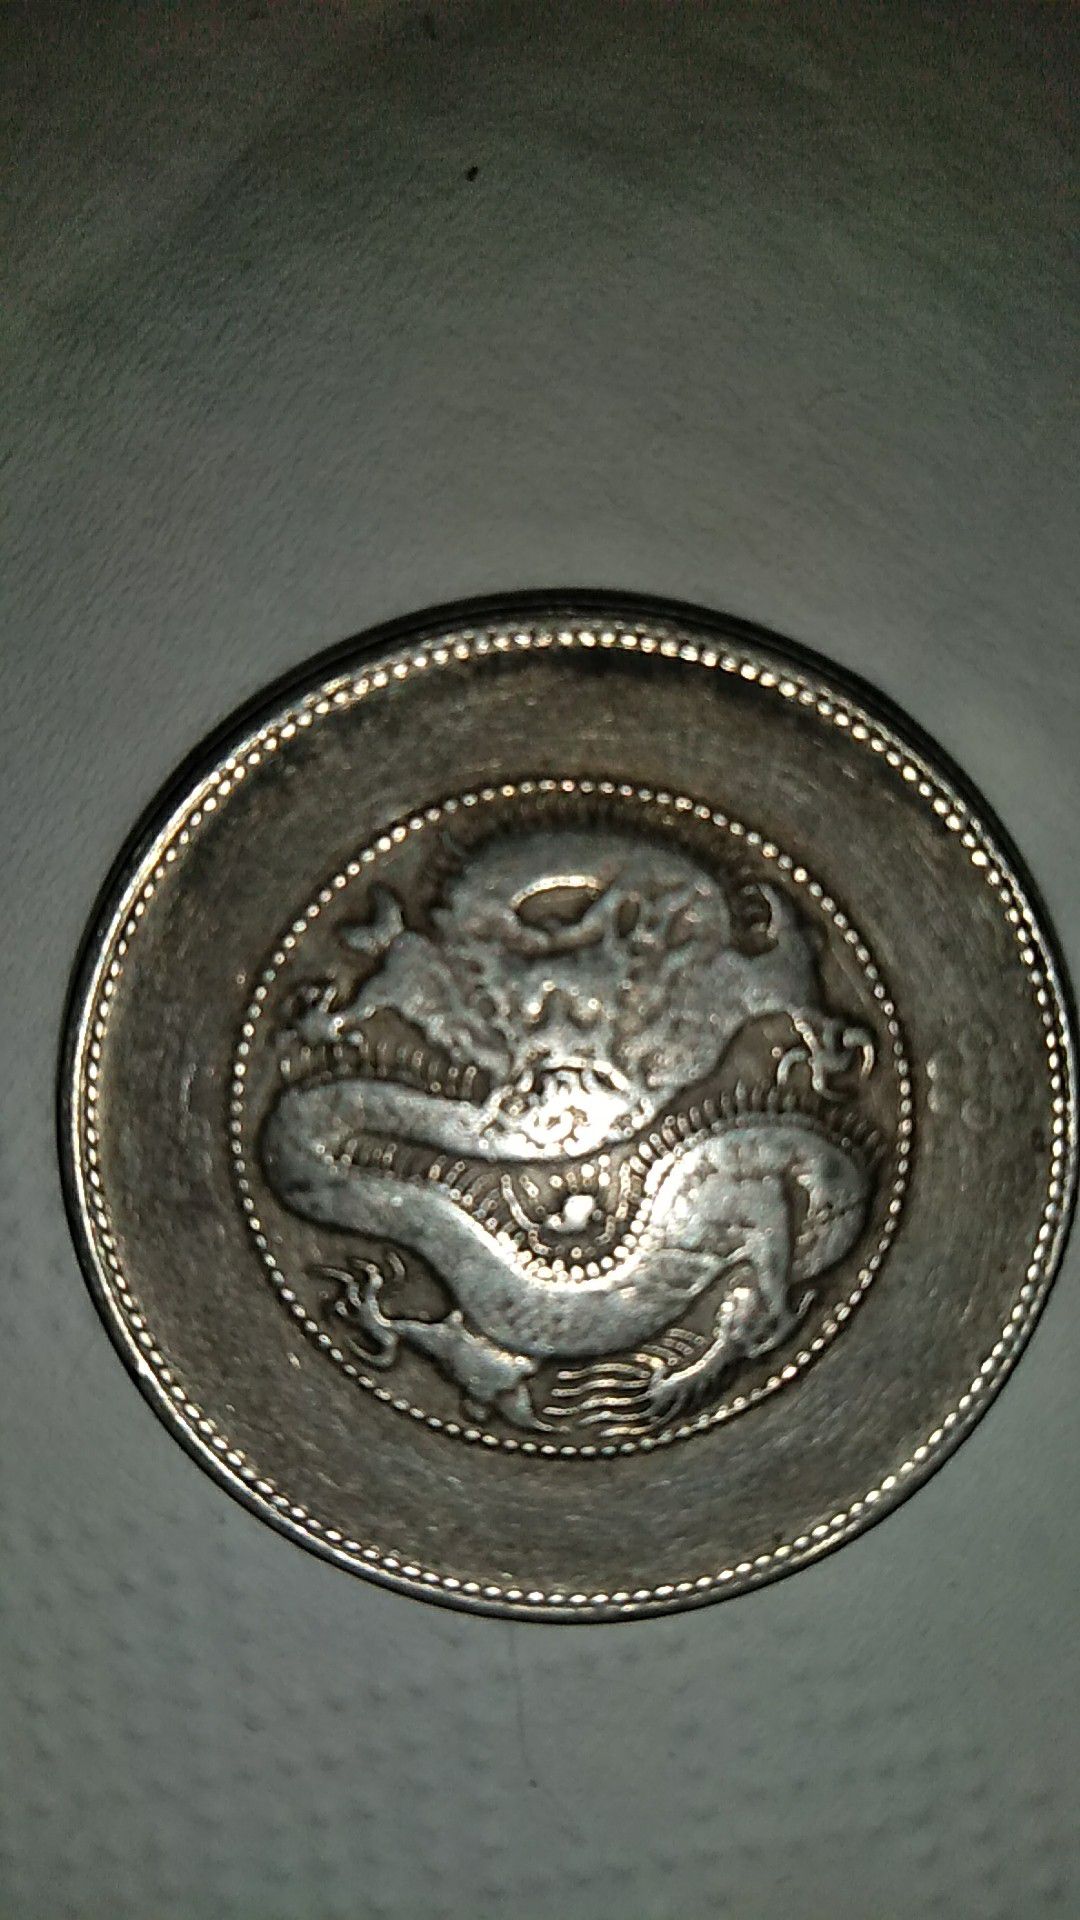 1920-35 Chinese 50 cent piece.